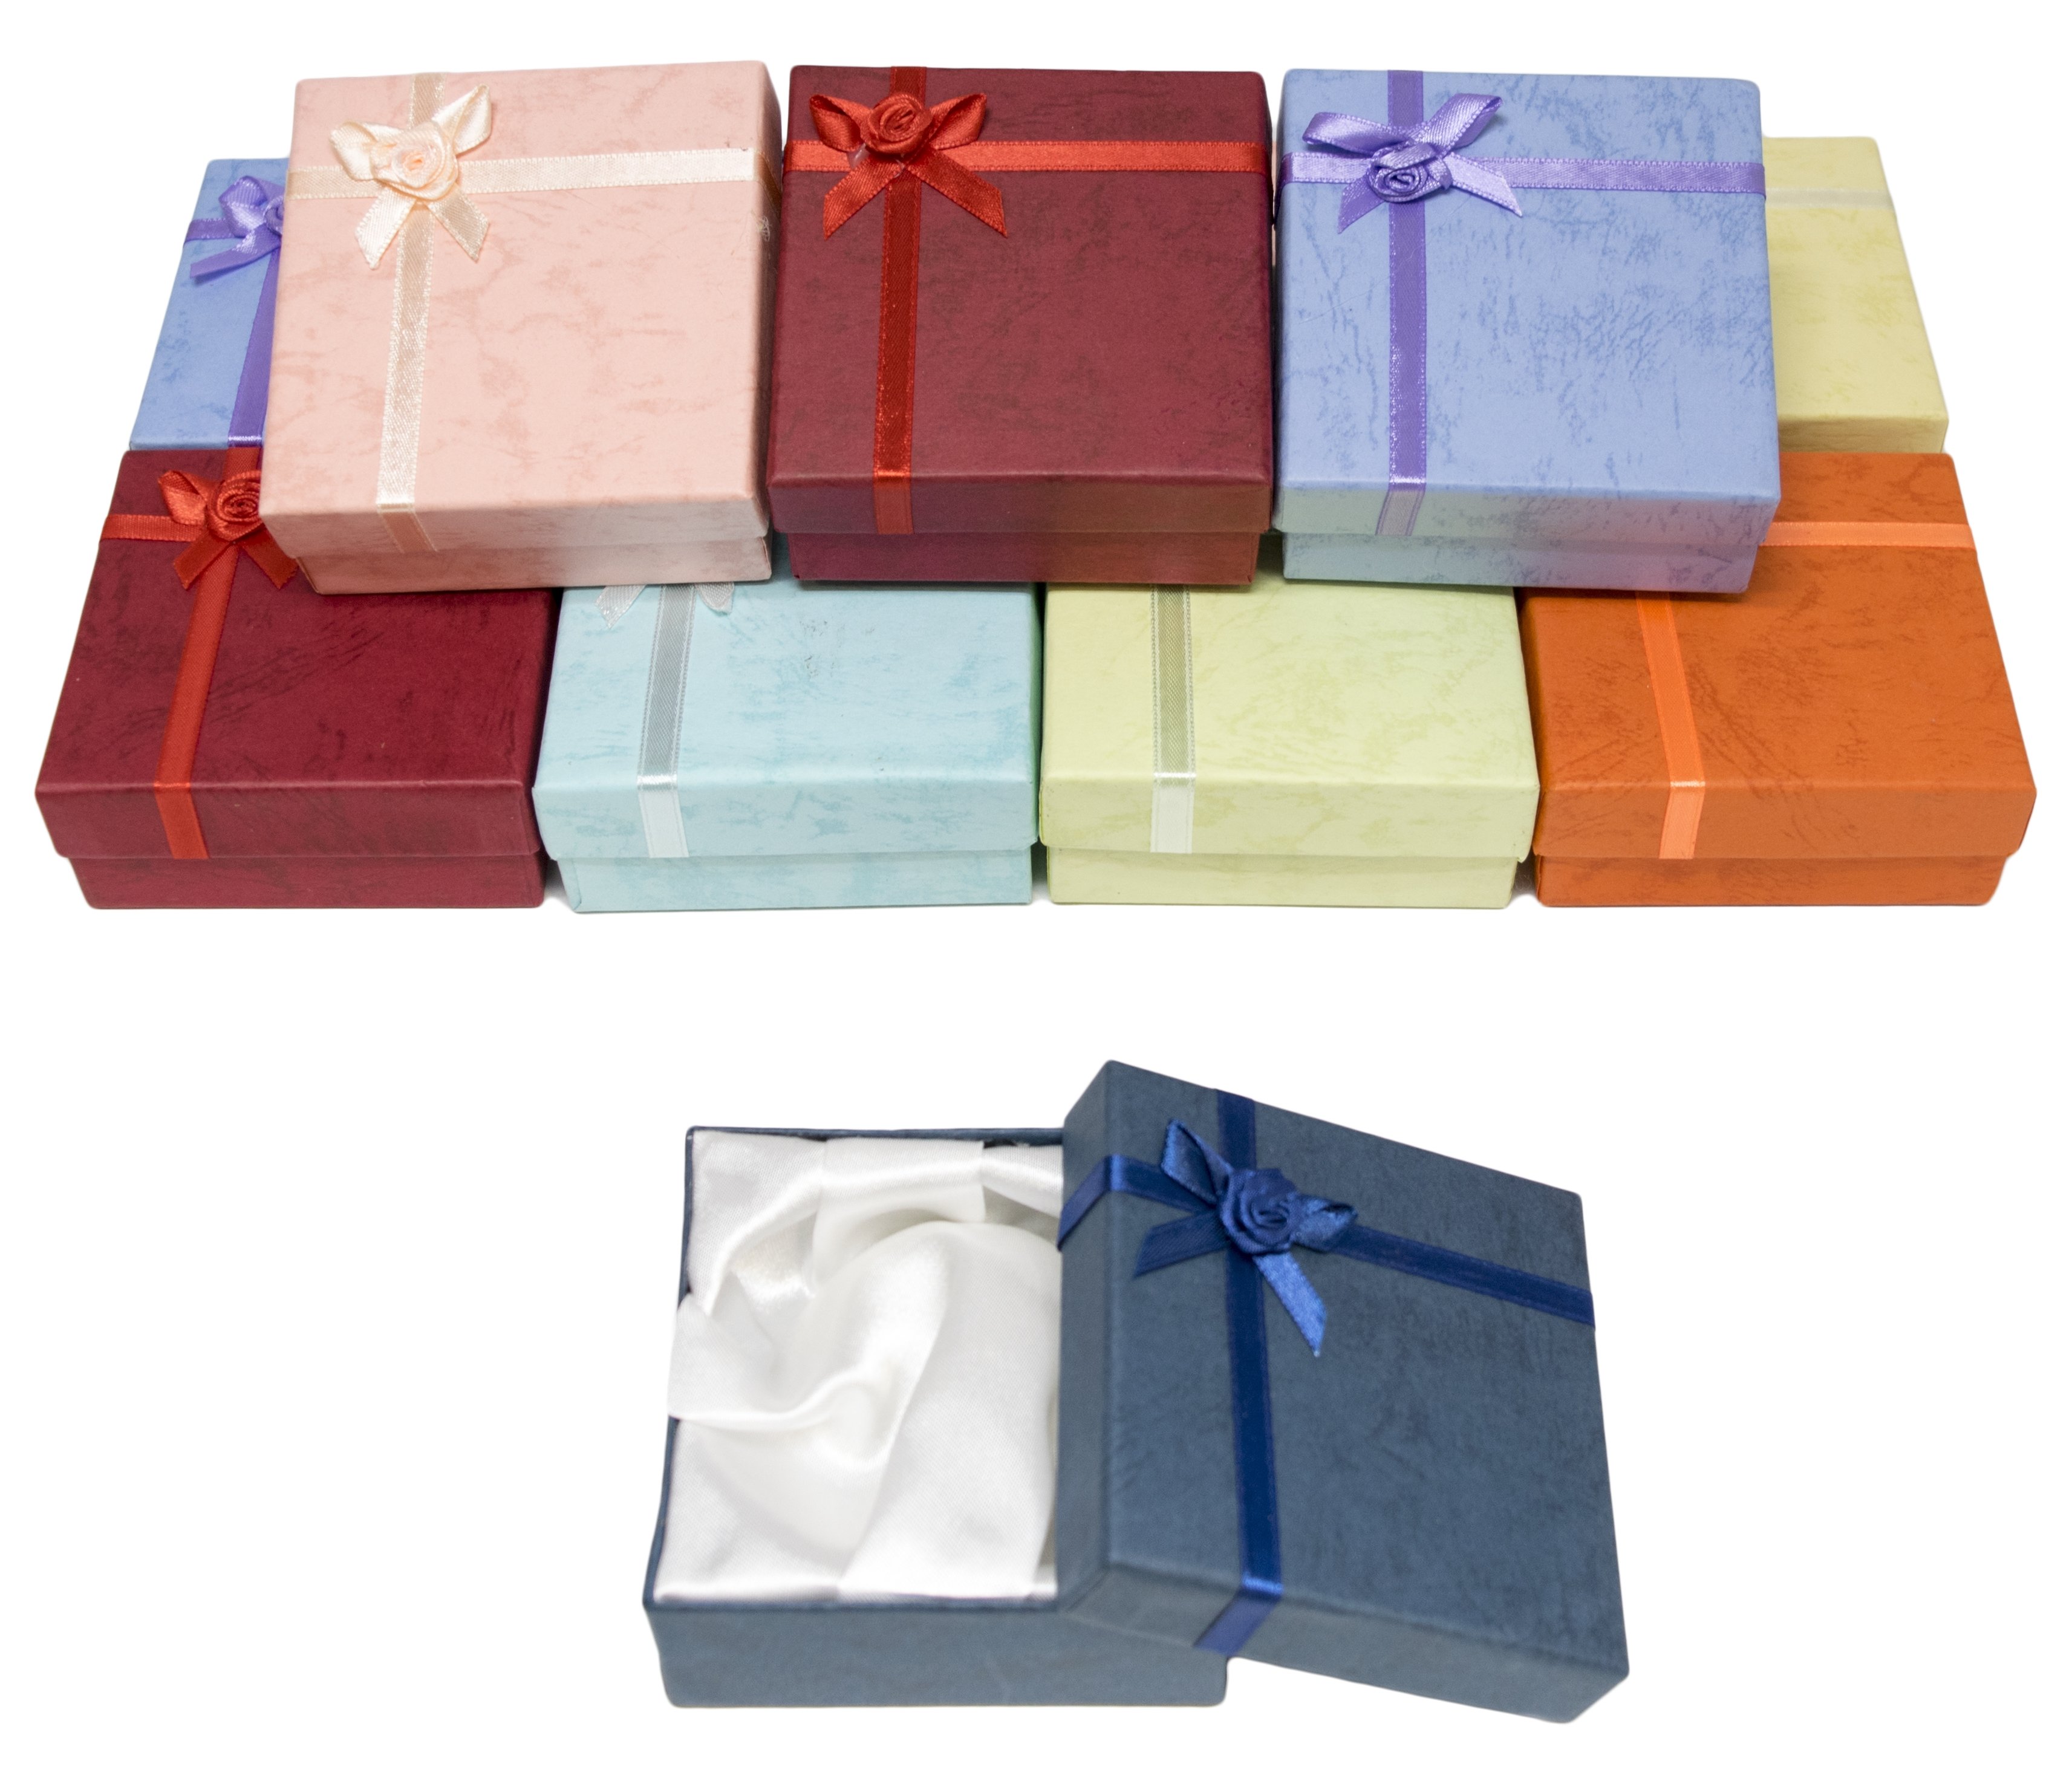 Novel Box™ Cardboard Jewelry Gift Boxes With Rosebug Bows in Assorted ...